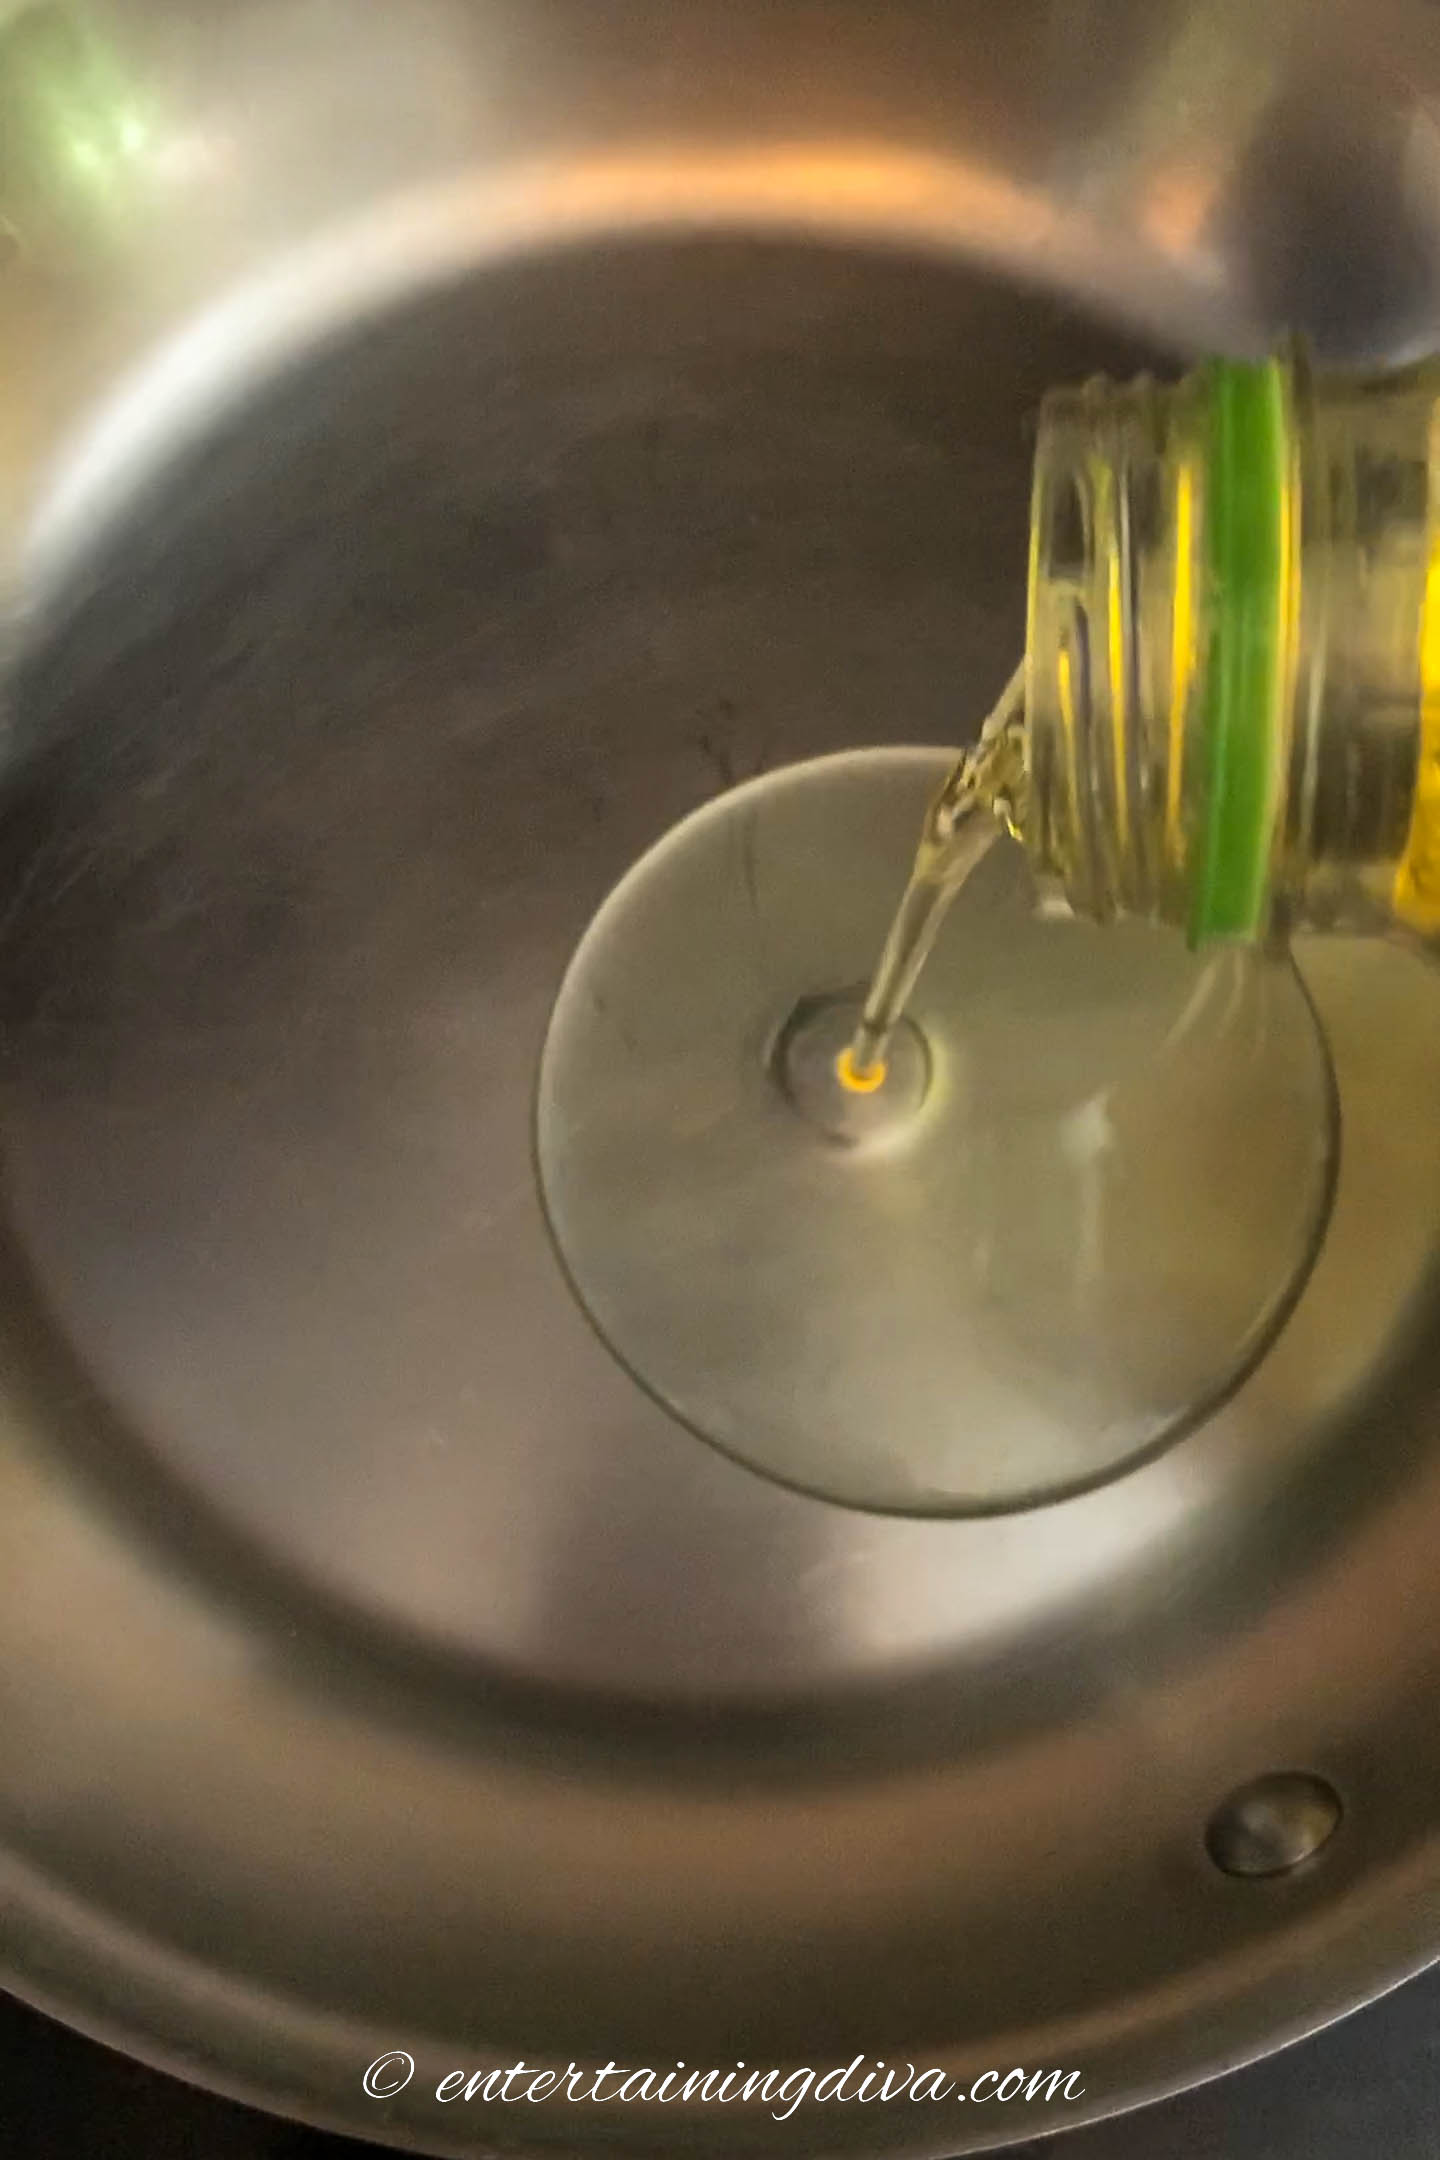 vegetable oil being poured into a frying pan